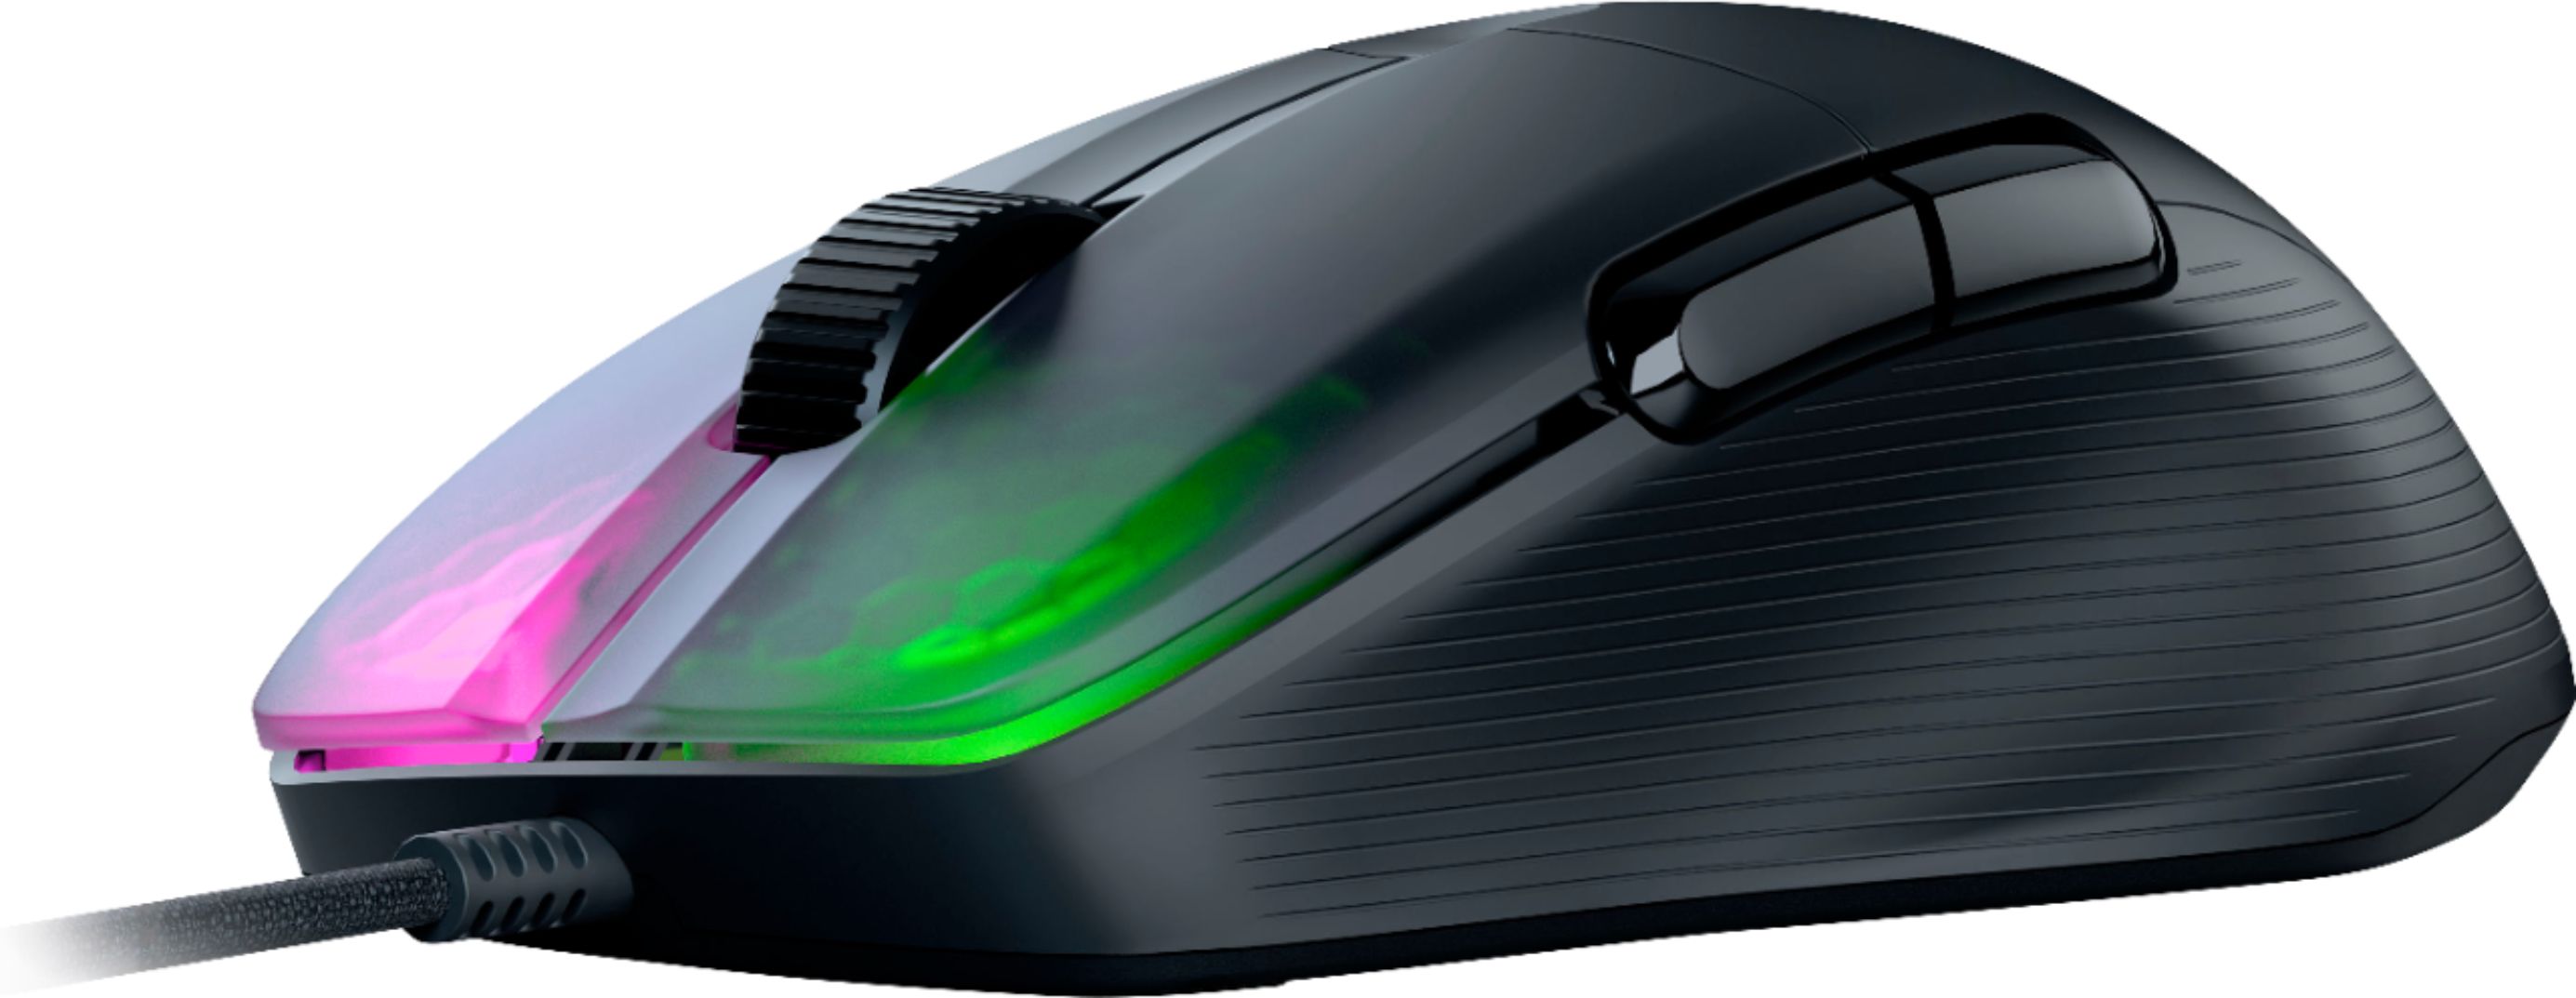 Angle View: ROCCAT - Kone Pro Ultralight Wired Optical Gaming Mouse with 19k DPI and RGB Lighting - Ash Black